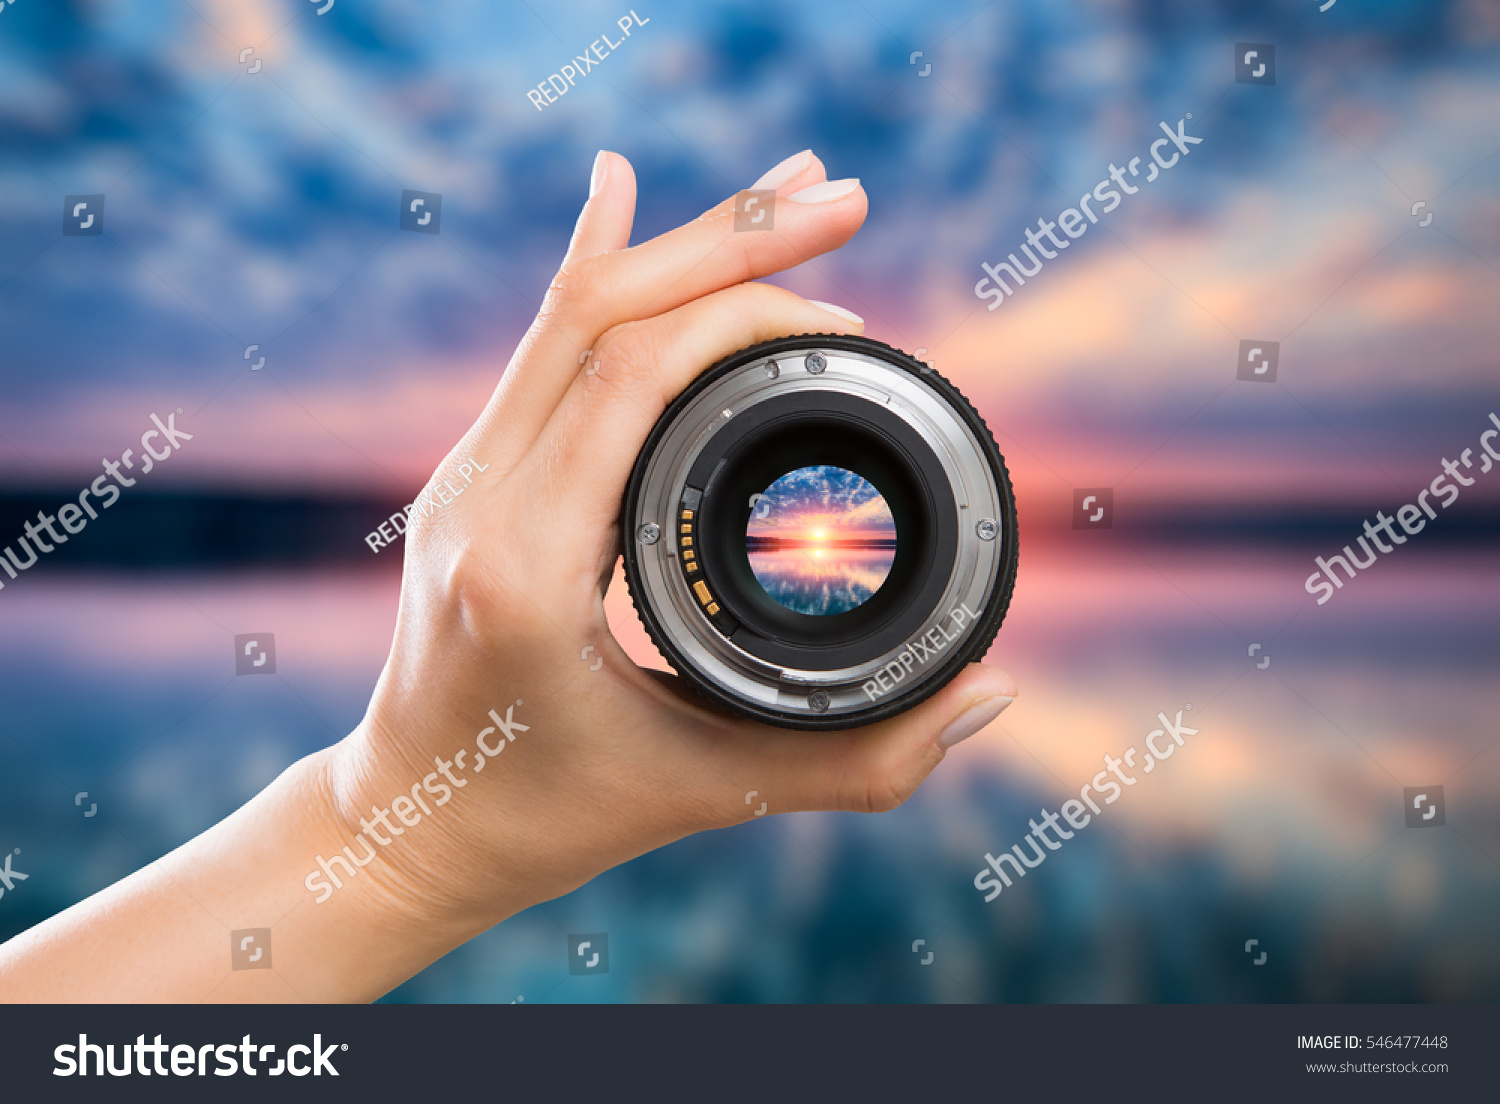 photography view camera photographer lens lense through video photo digital glass hand blurred focus people sun sunset sunrise cloud sky water lake concept - stock image #546477448